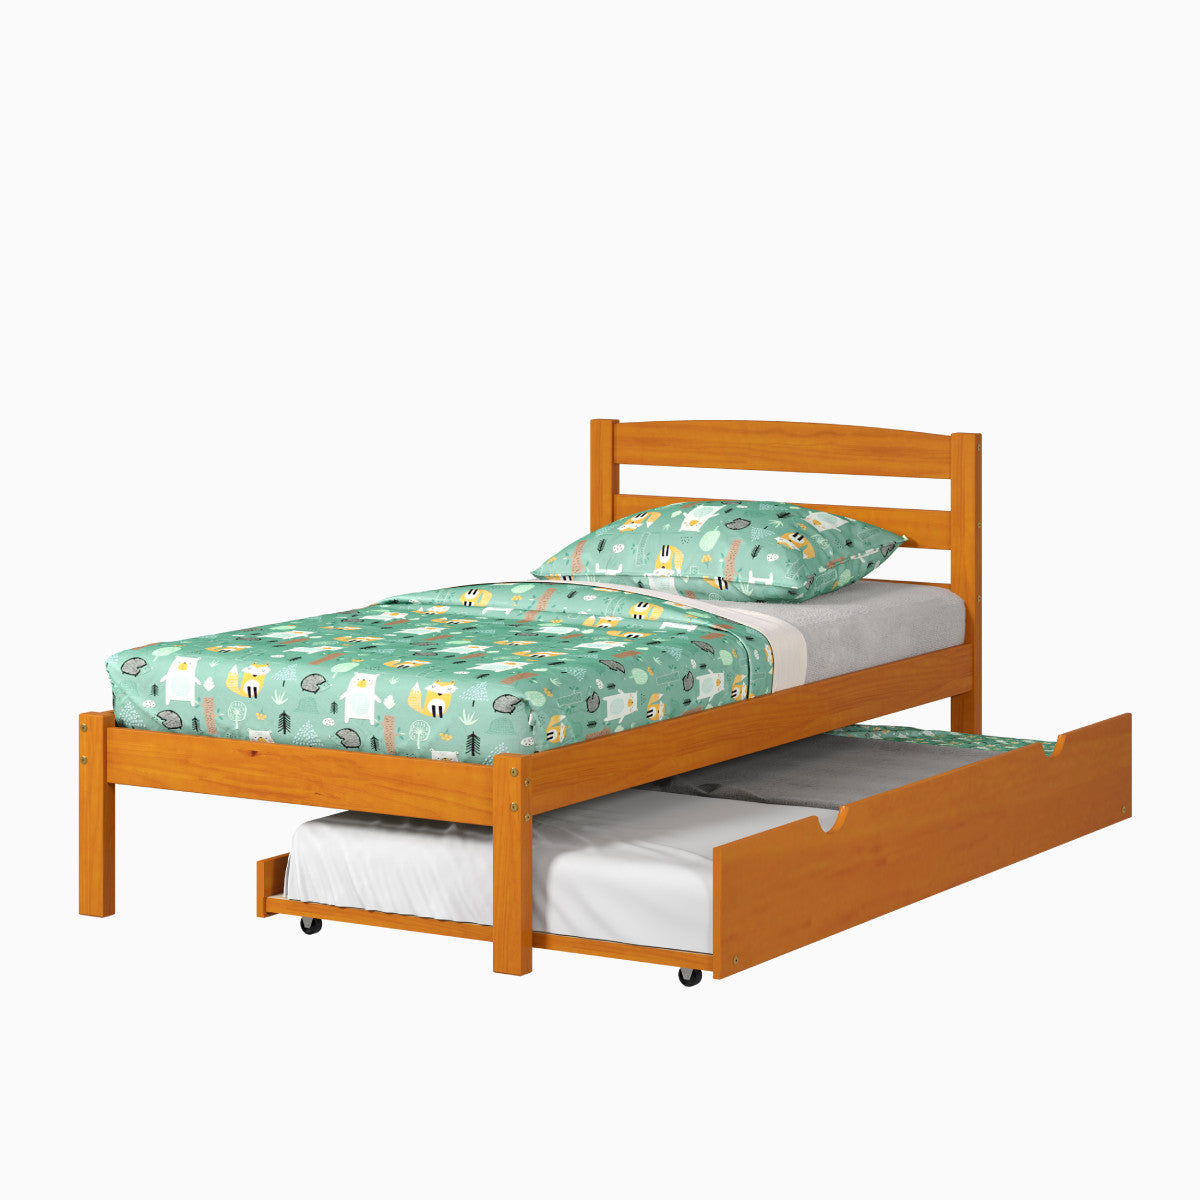 TWIN ECONO BED WITH TRUNDLE BED HONEY FINISH